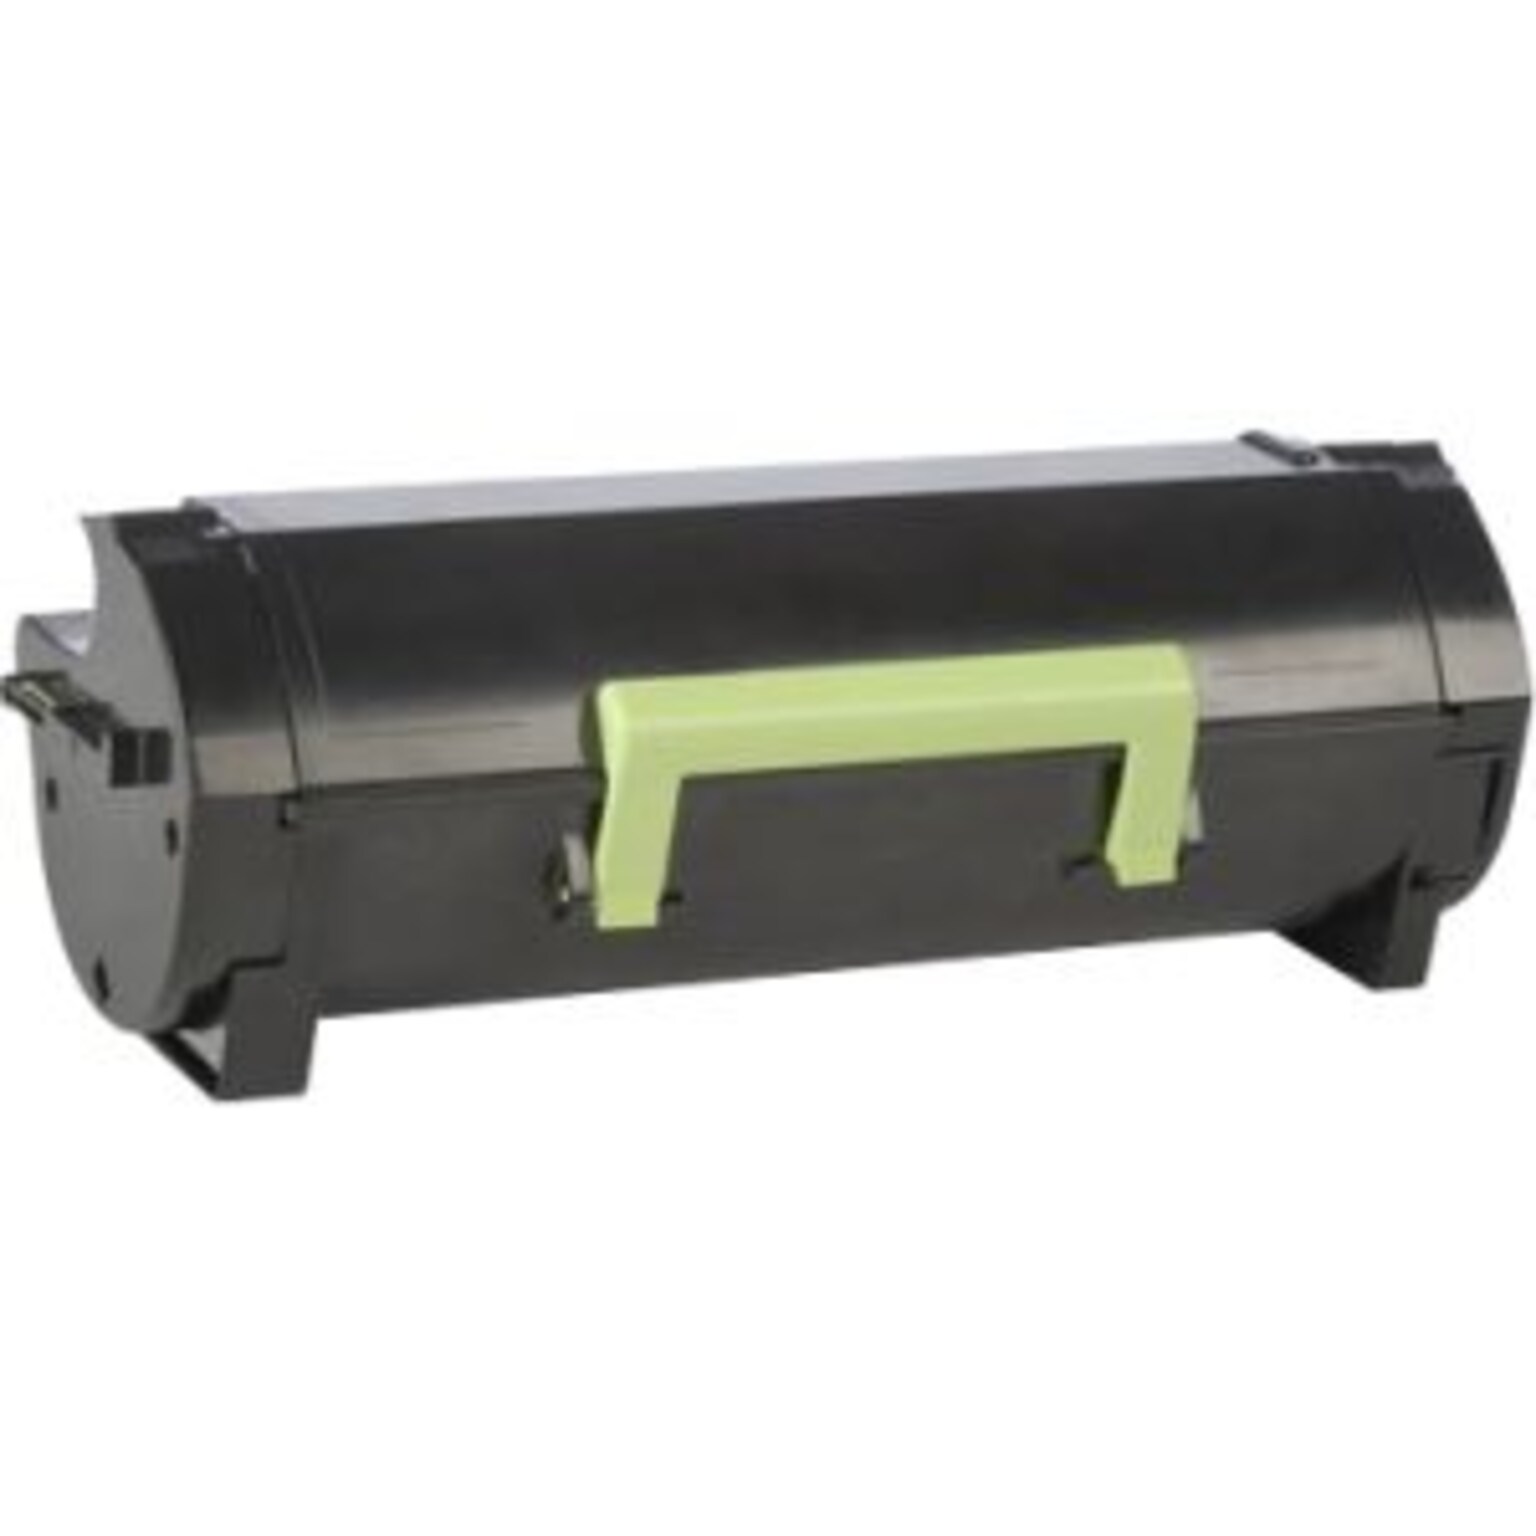 Lexmark® Unison 50F0H0G Black 5000 Pages High Yield Toner Cartridge for MS310d/MS310dn Printer